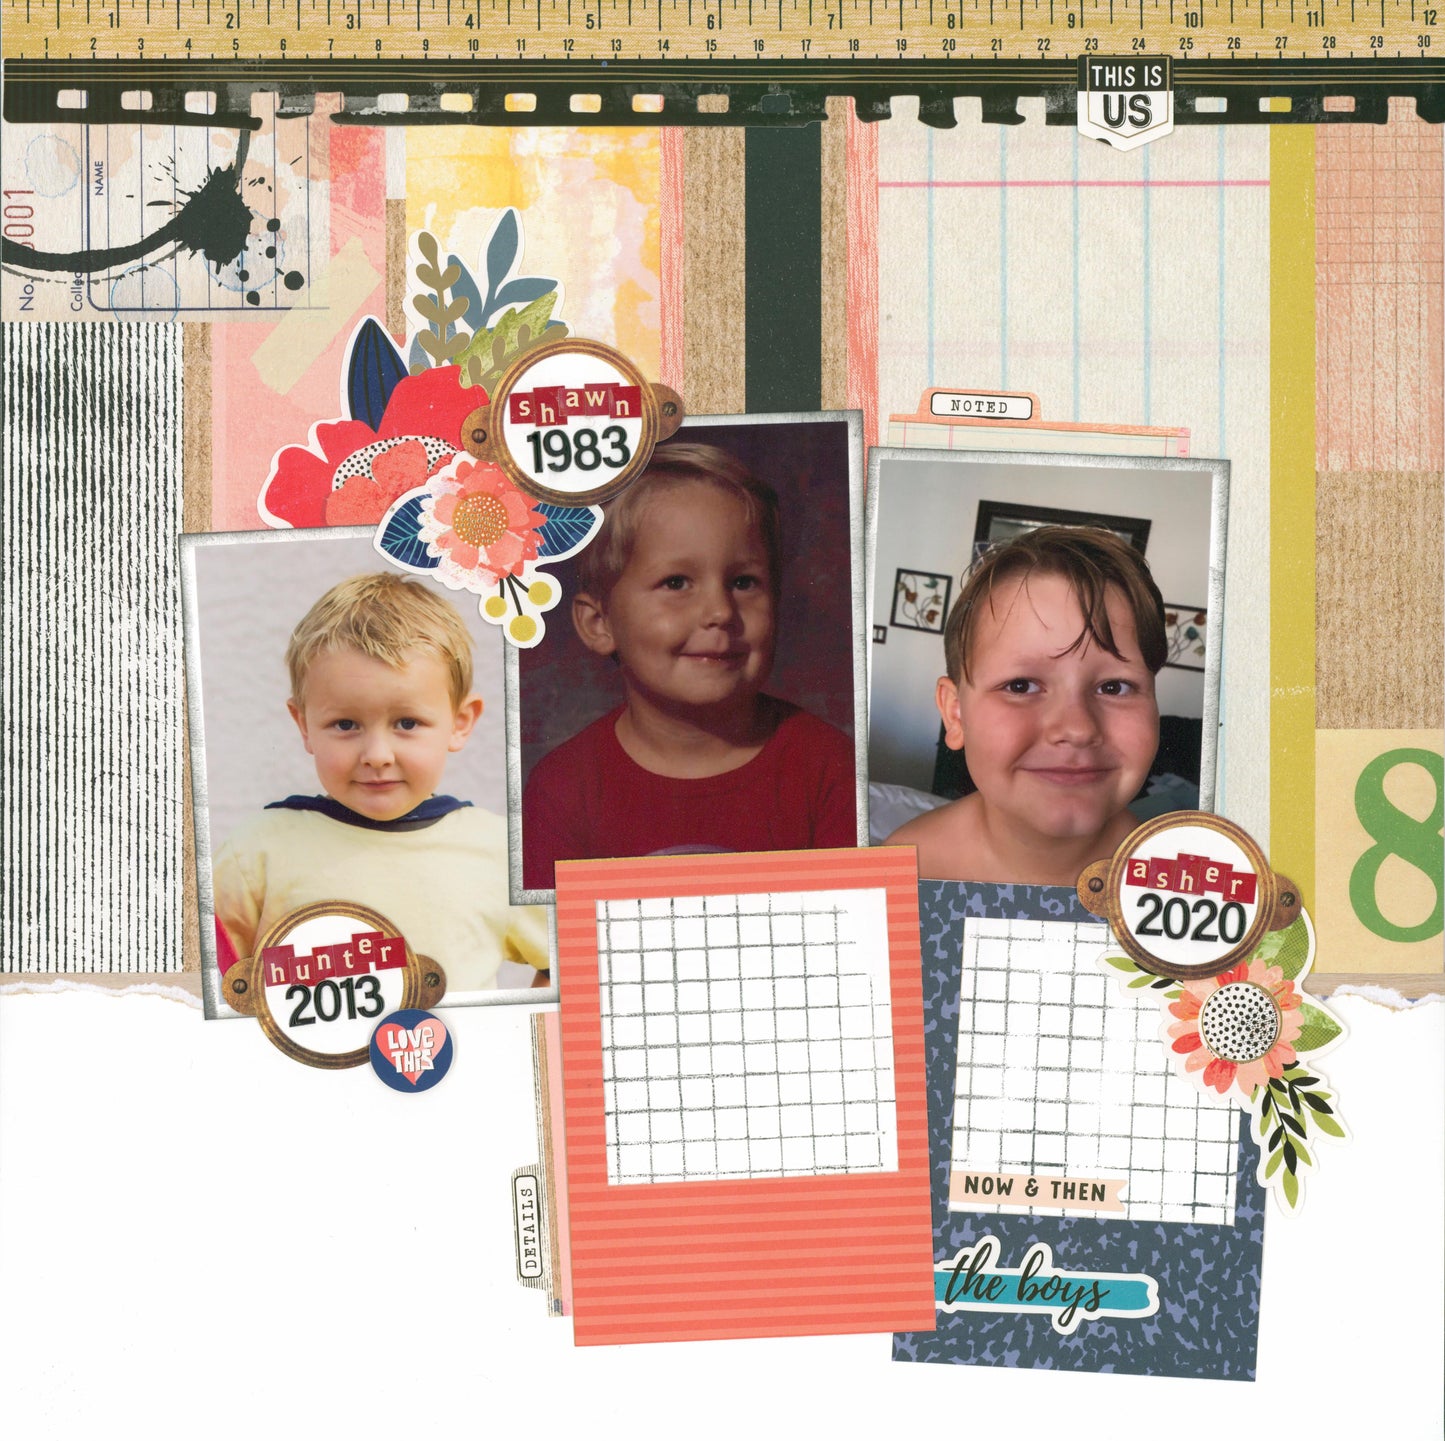 "Everyday" Mini Page Kit by Meridy Twilling